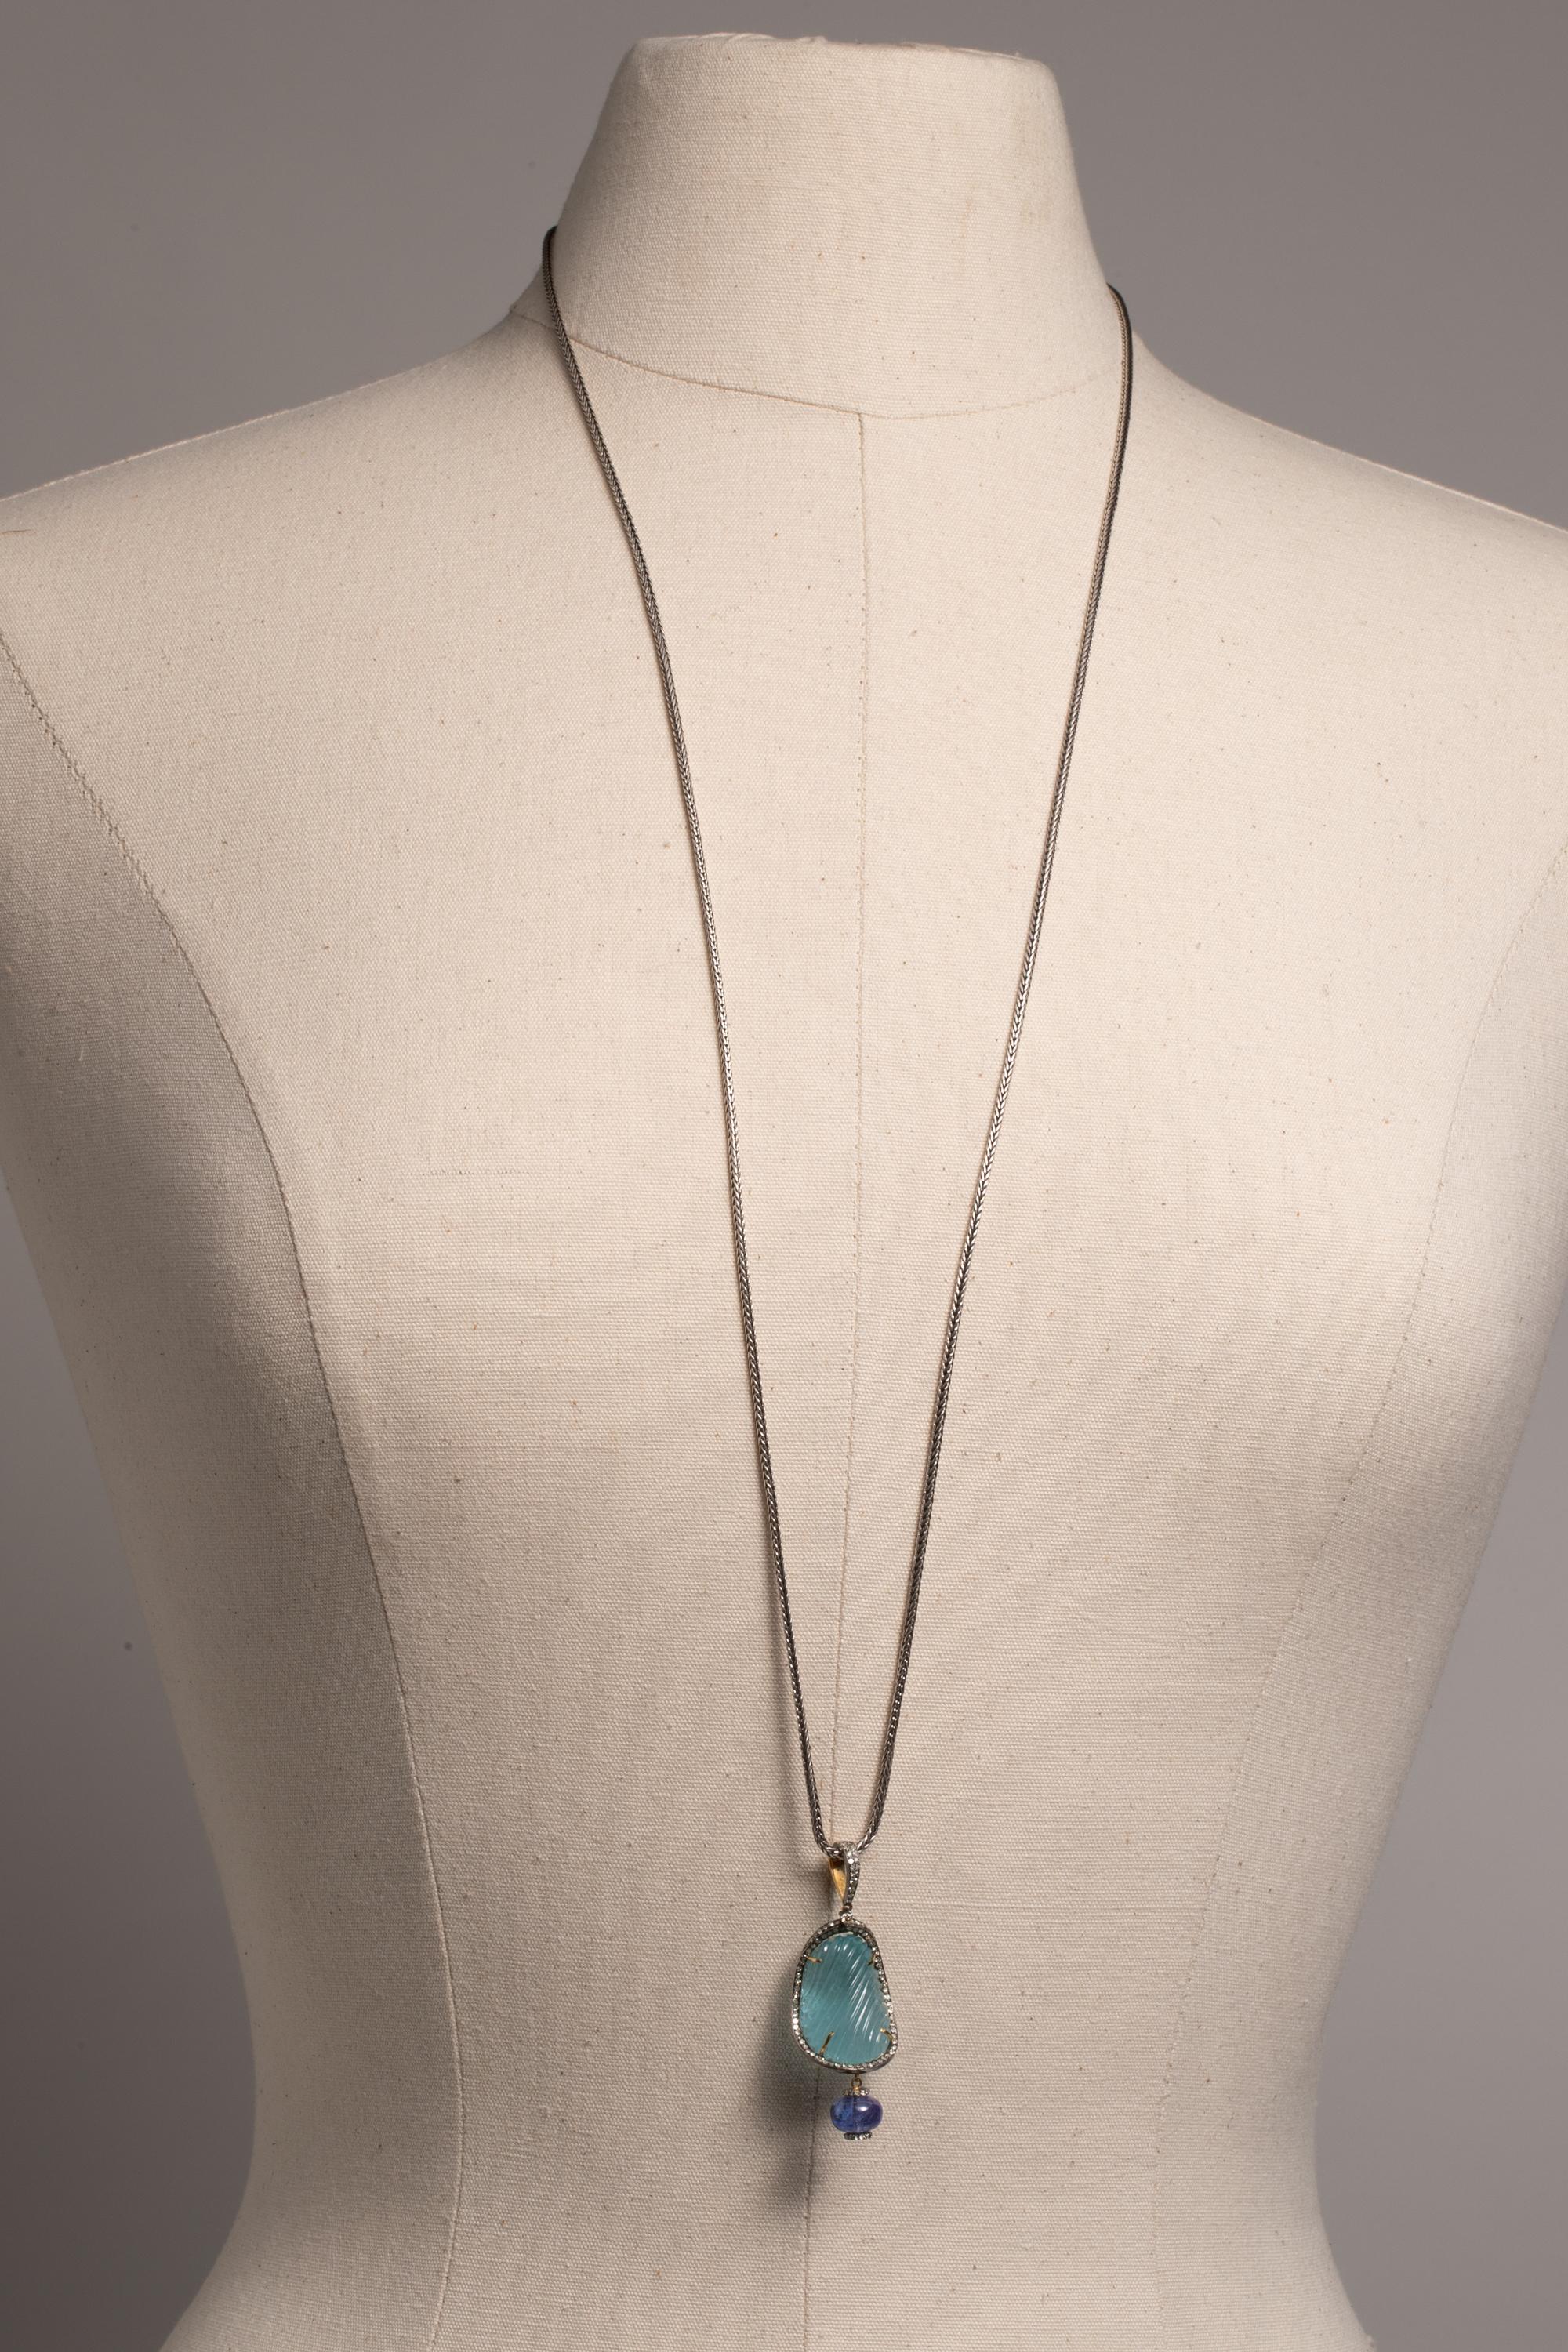 A long pendant necklace with a large hand-carved aquamarine bordered with round-cut, pave`-set diamonds and a diamond bail.  Round tanzanite bead bordered with diamond rondelles dangles underneath. Carat weight of the aquamarine is 37.88; the